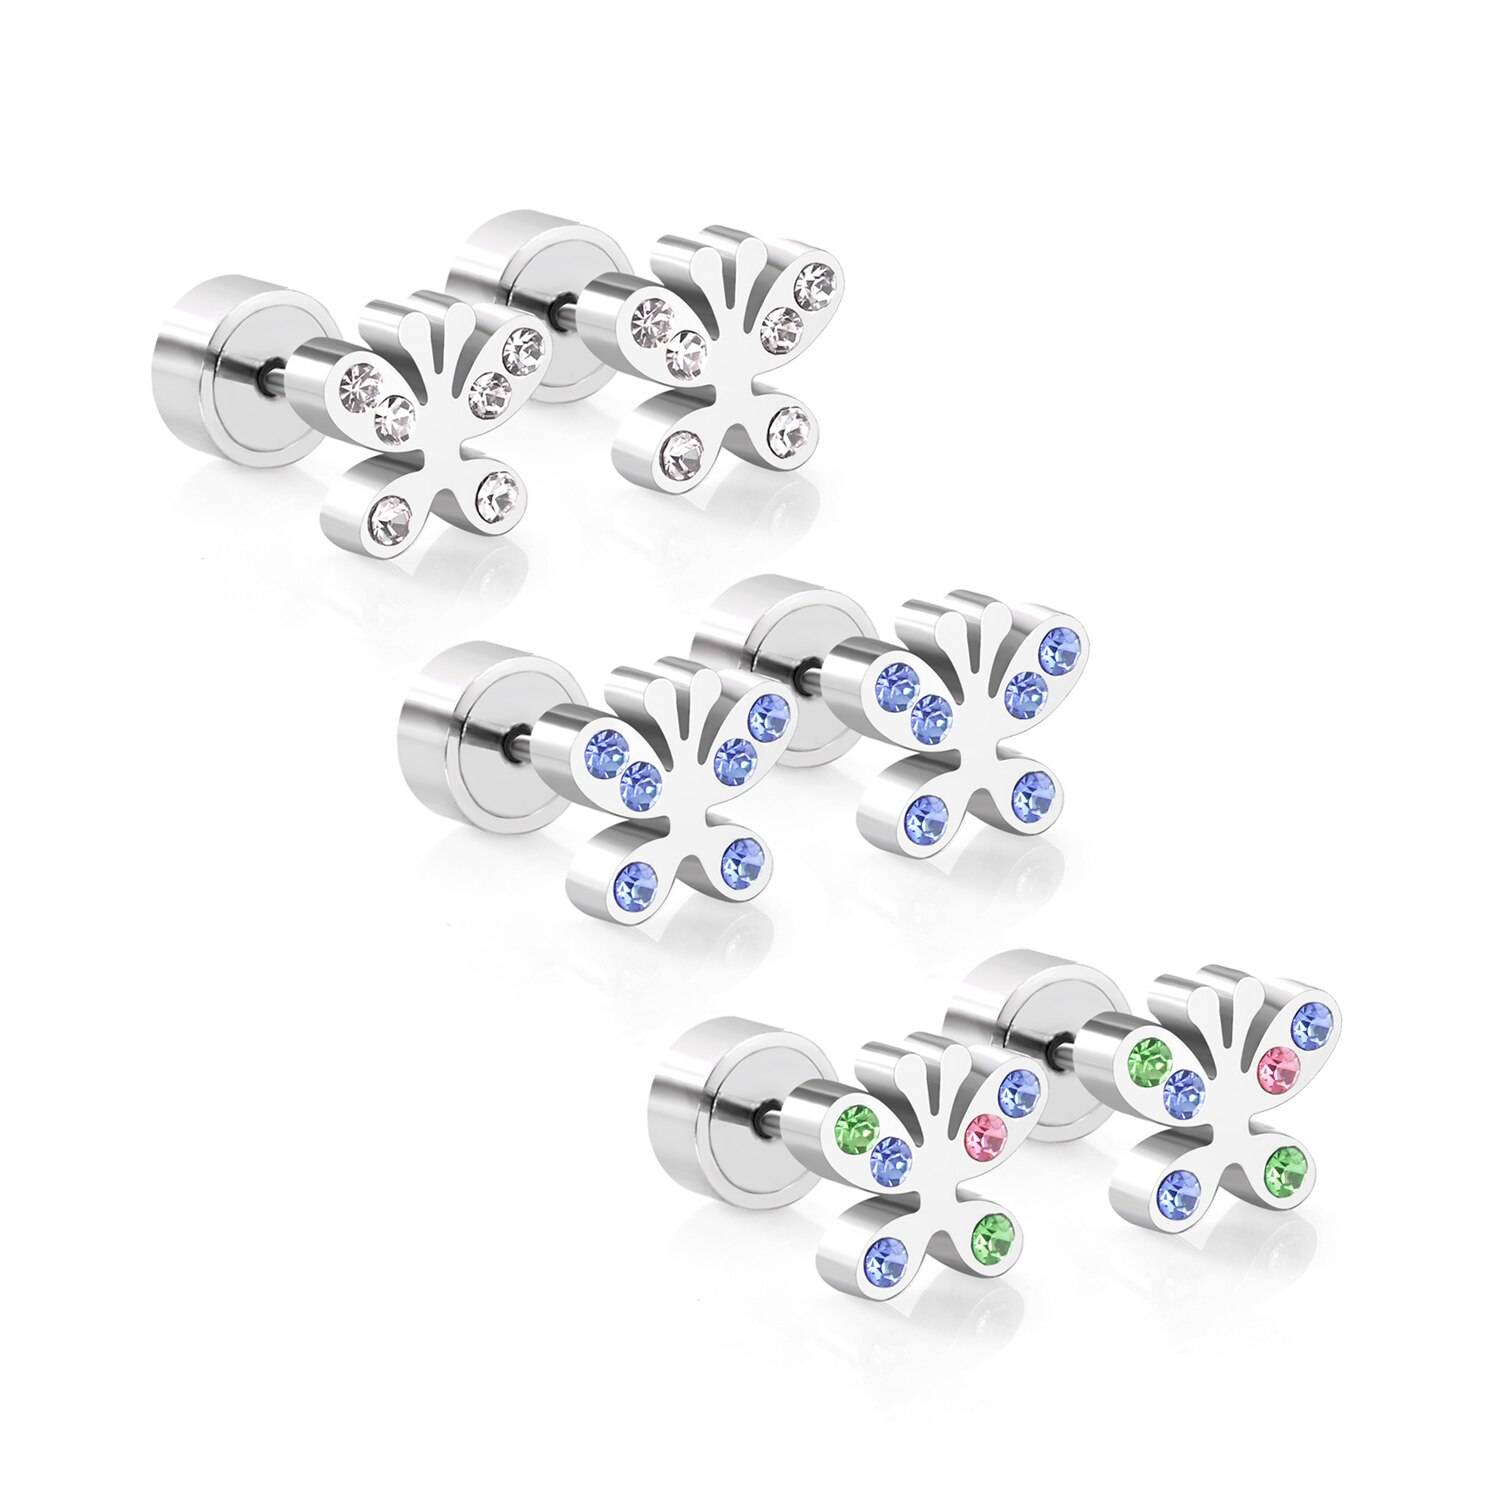 Cute Colourful Cubic Zirconia Stud Earrings for Girls – NAOMI Uncategorized Children's Jewellery 8d255f28538fbae46aeae7: as picture|Blue|butterfly blue|butterfly colorful|butterfly silver|colorful heart|pink|pink heart|Silver|silver heart|silver red|star AB crystal|star colorful|star silver